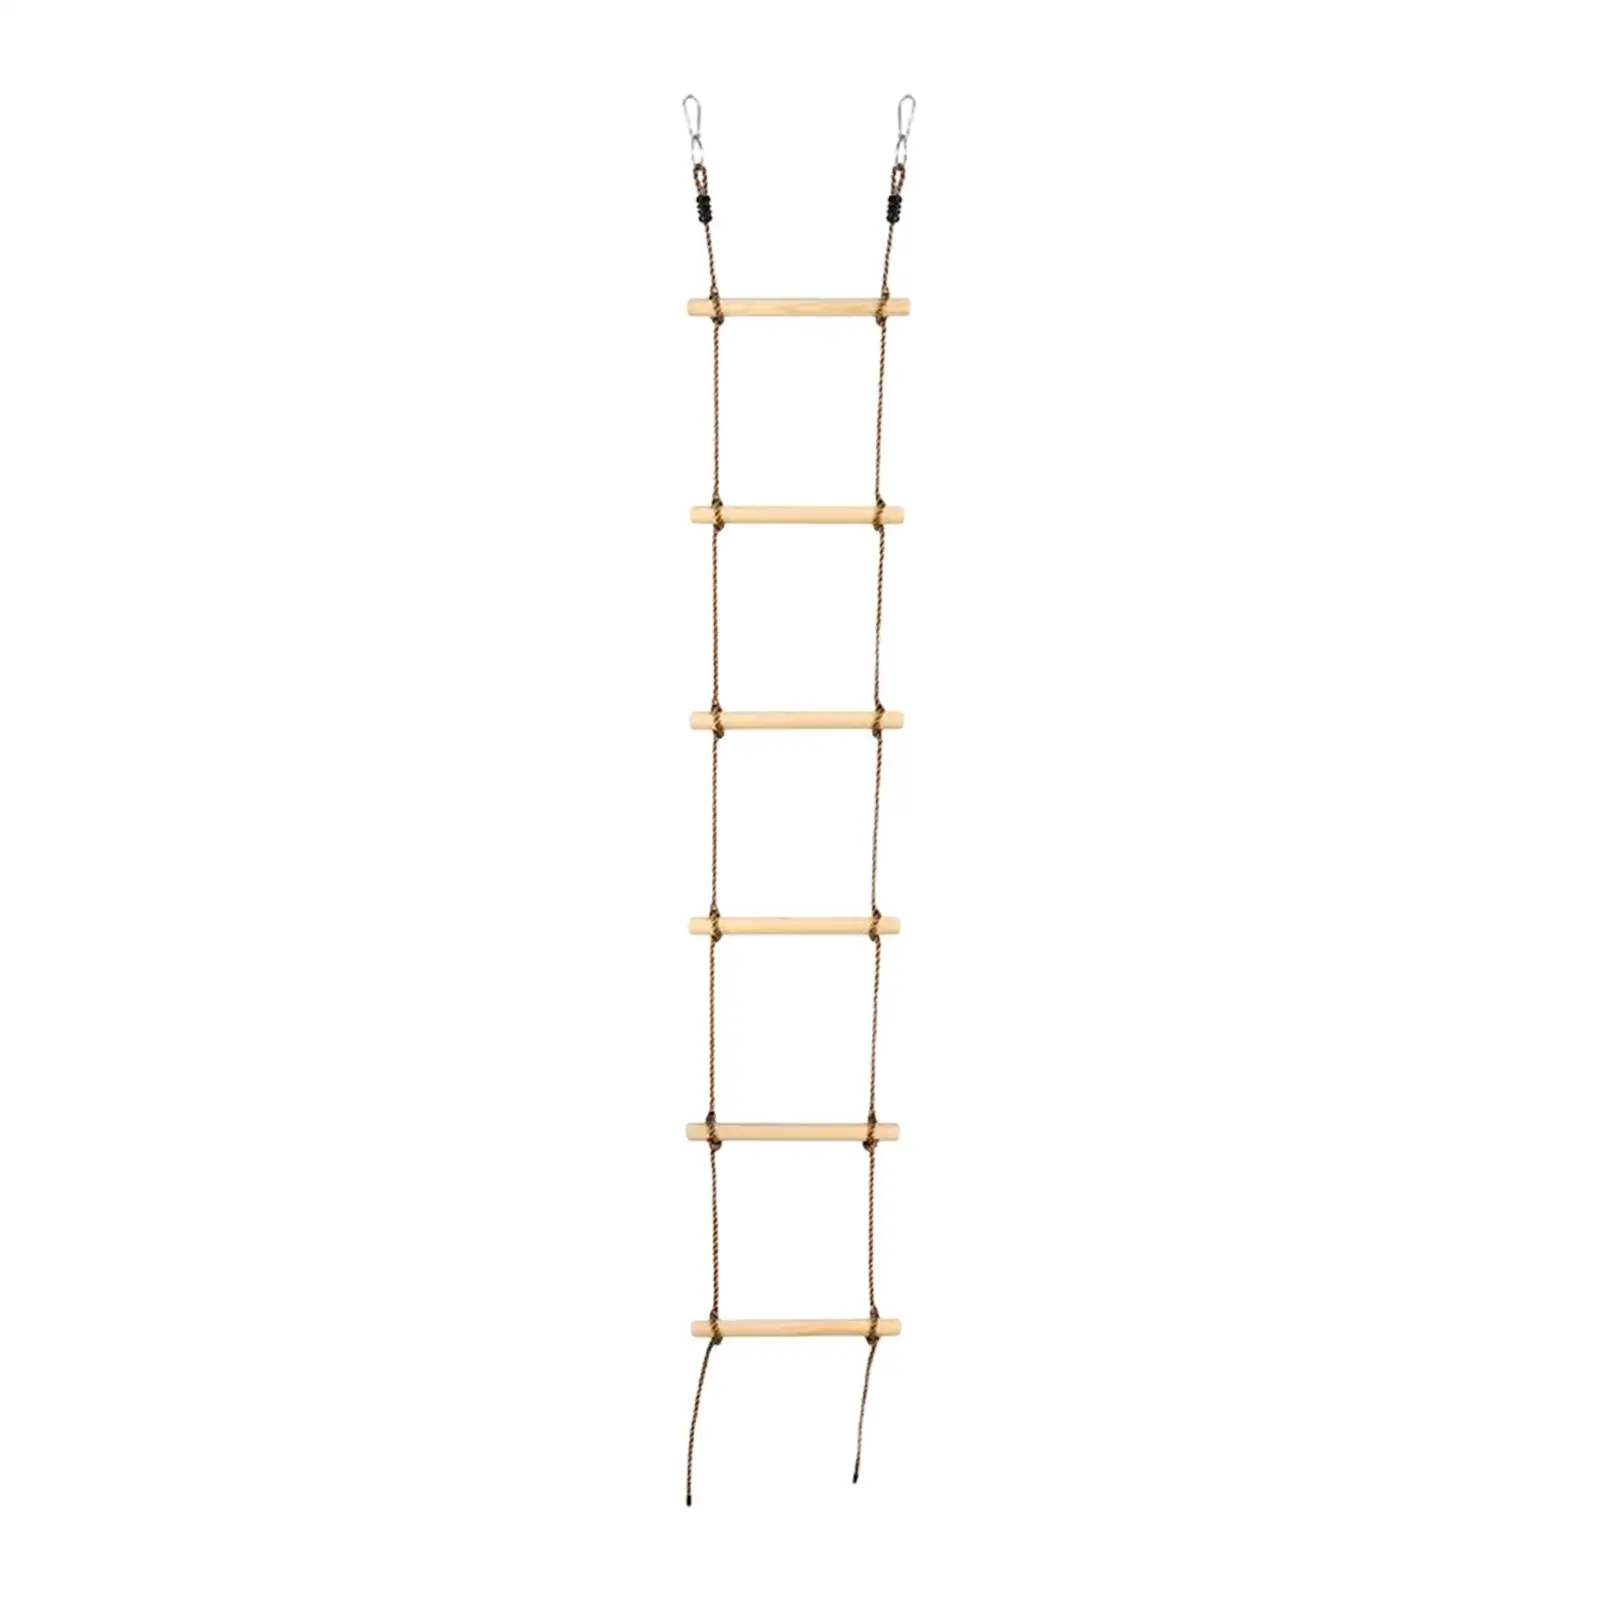 Kids Climbing Ladder Hanging Rope Ladder 6 Wood Rungs for Park Treehouse